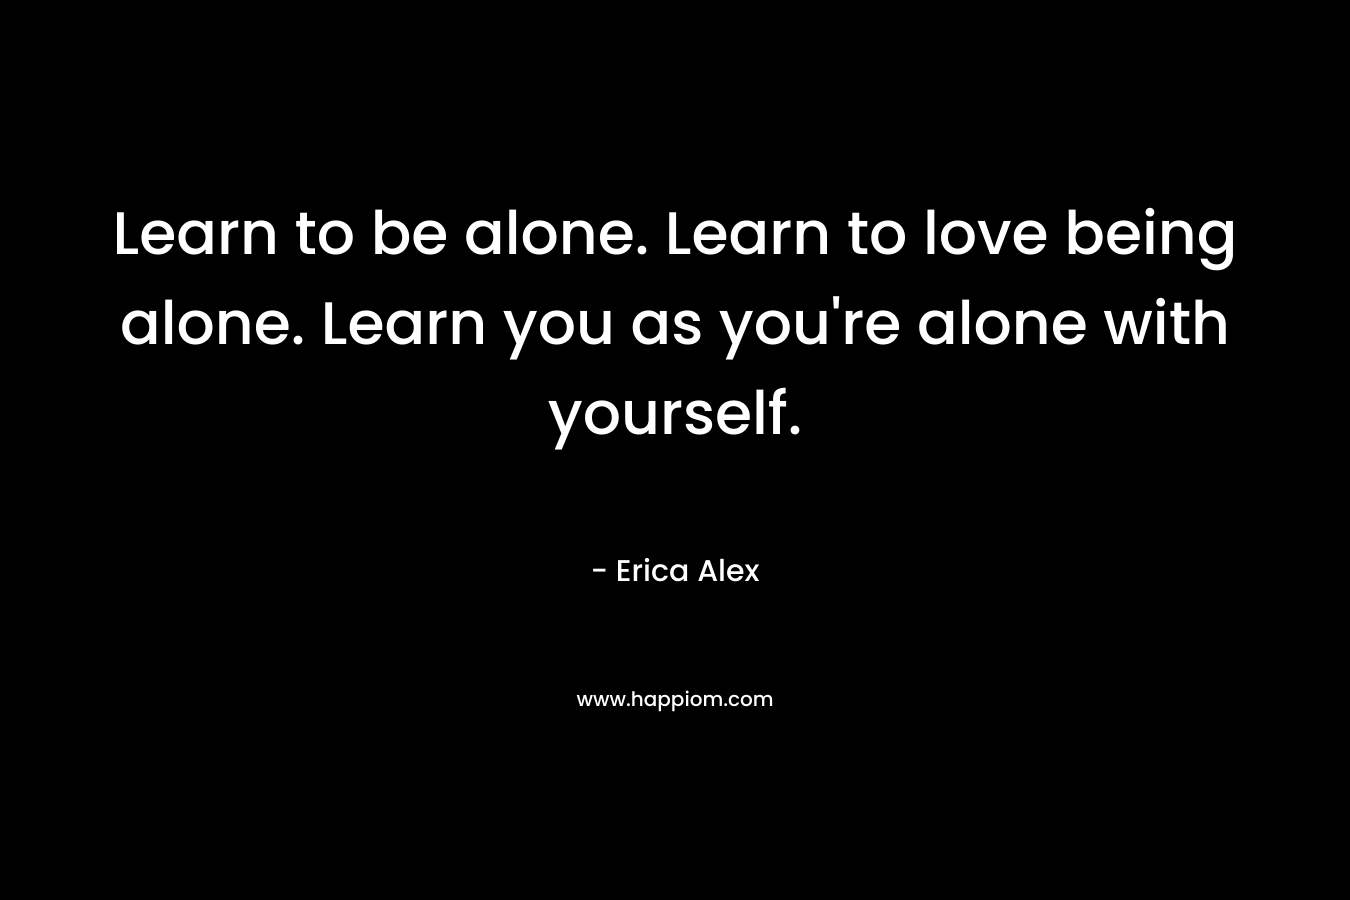 Learn to be alone. Learn to love being alone. Learn you as you’re alone with yourself. – Erica Alex